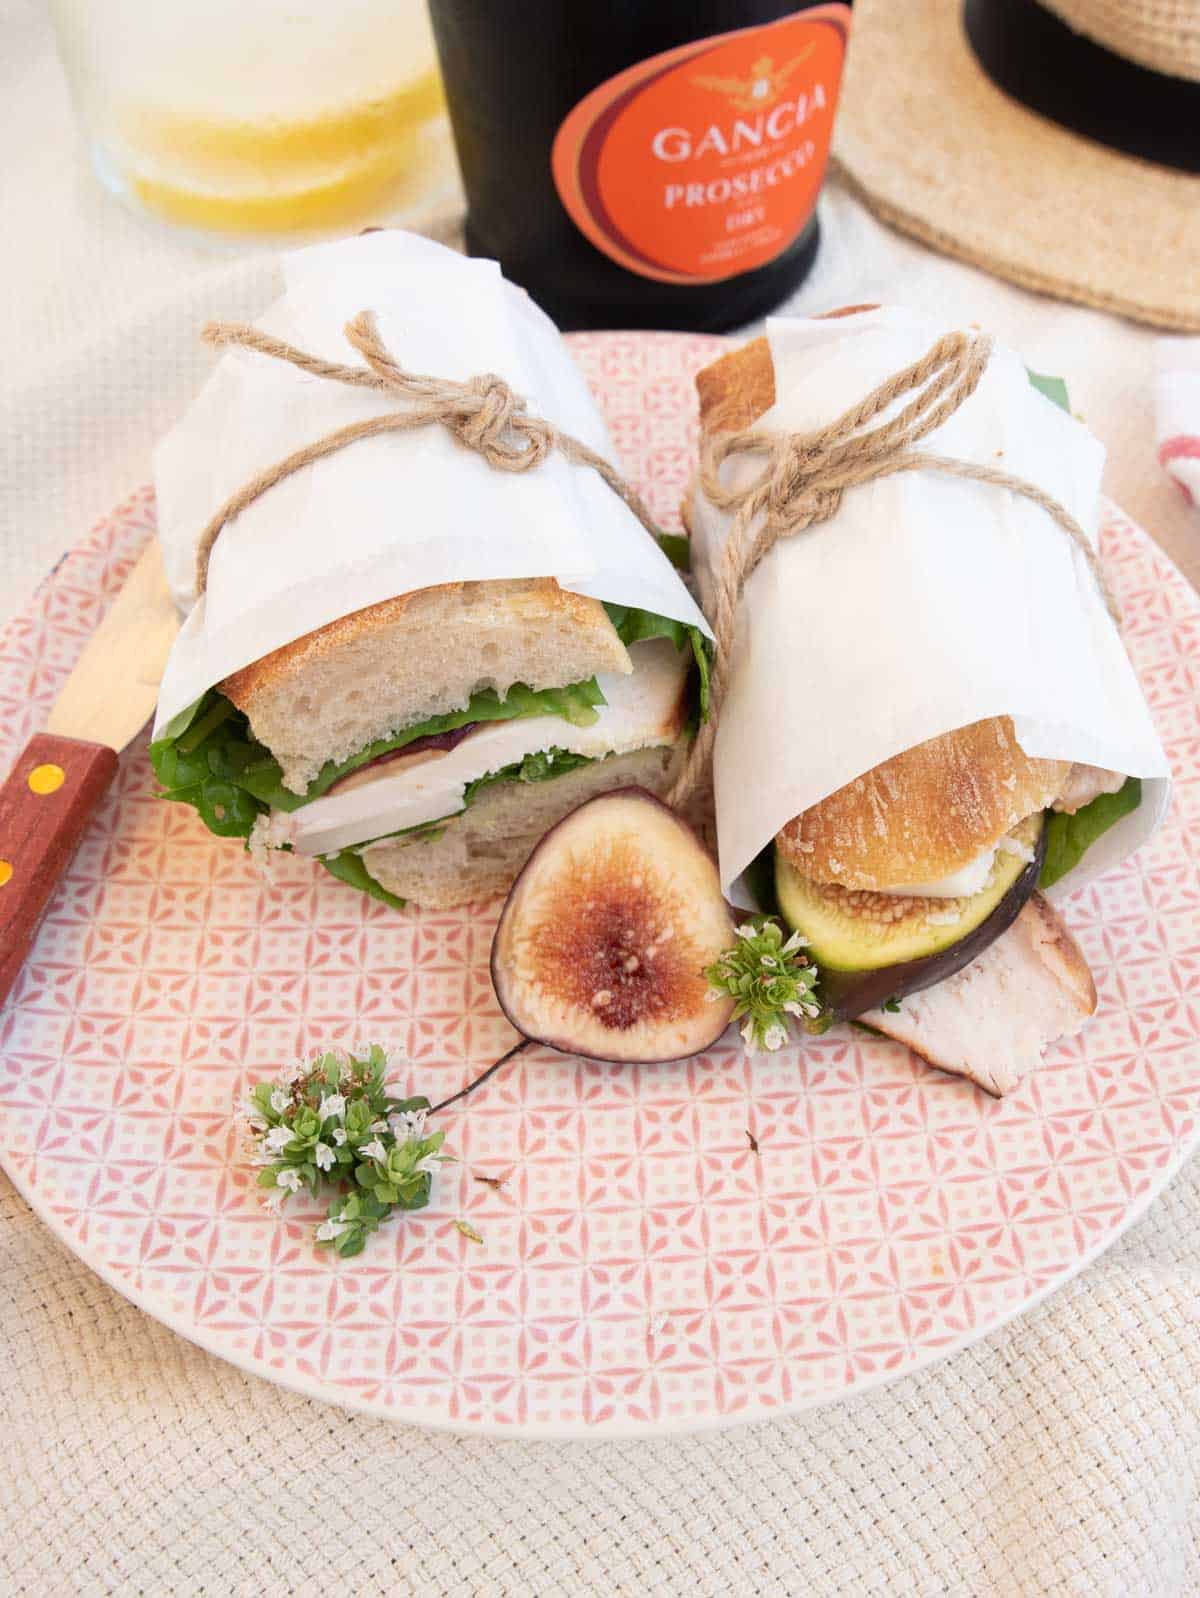 Two sandwiches wrapped in paper and tied with string on a plate next to a bottle of wine.